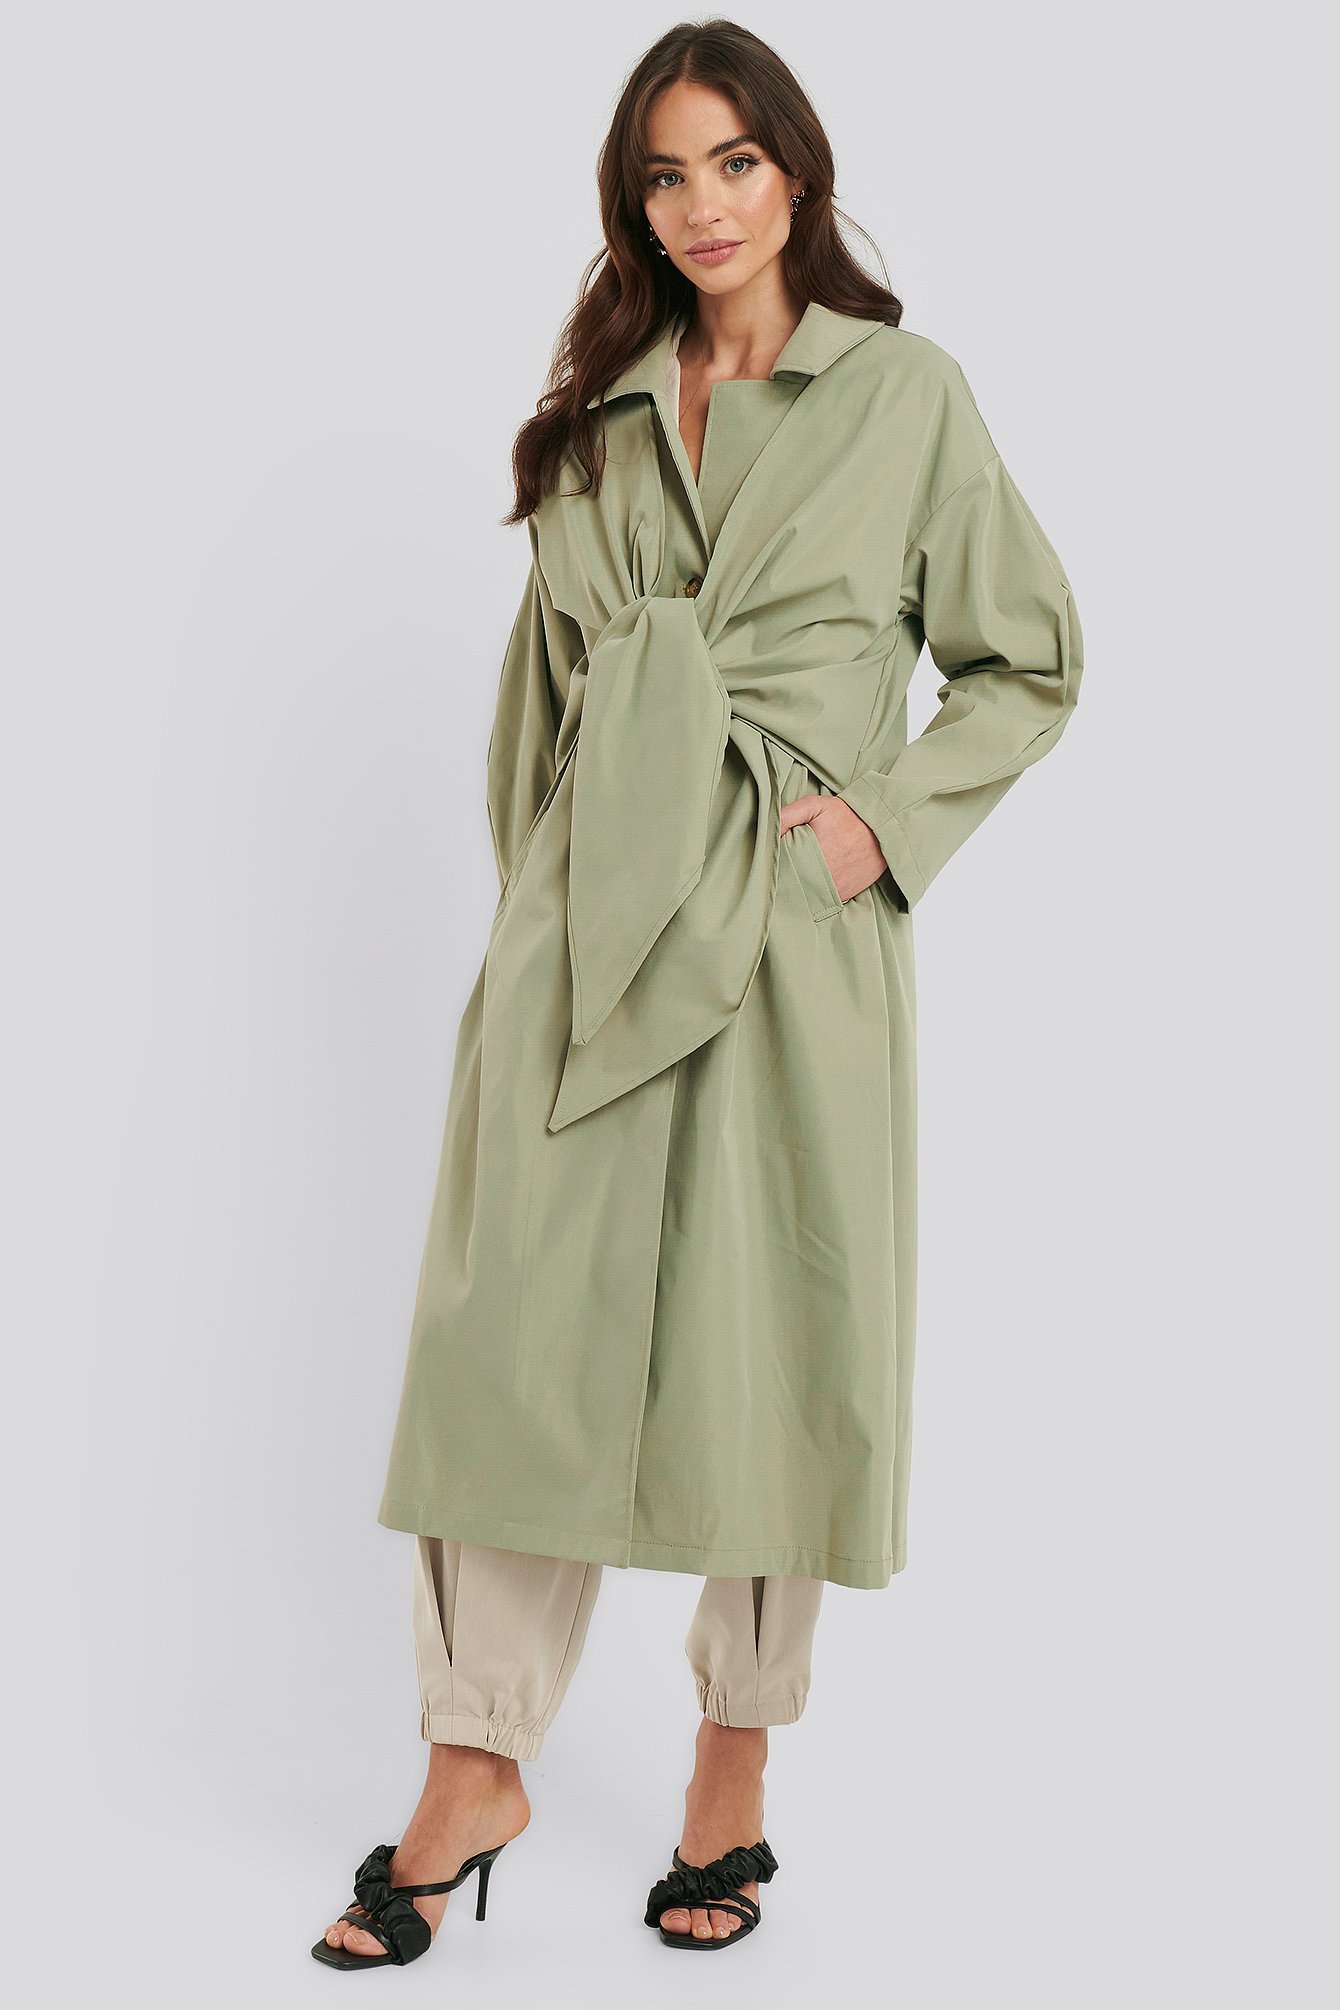 Tie Front Trench Coat Outfit